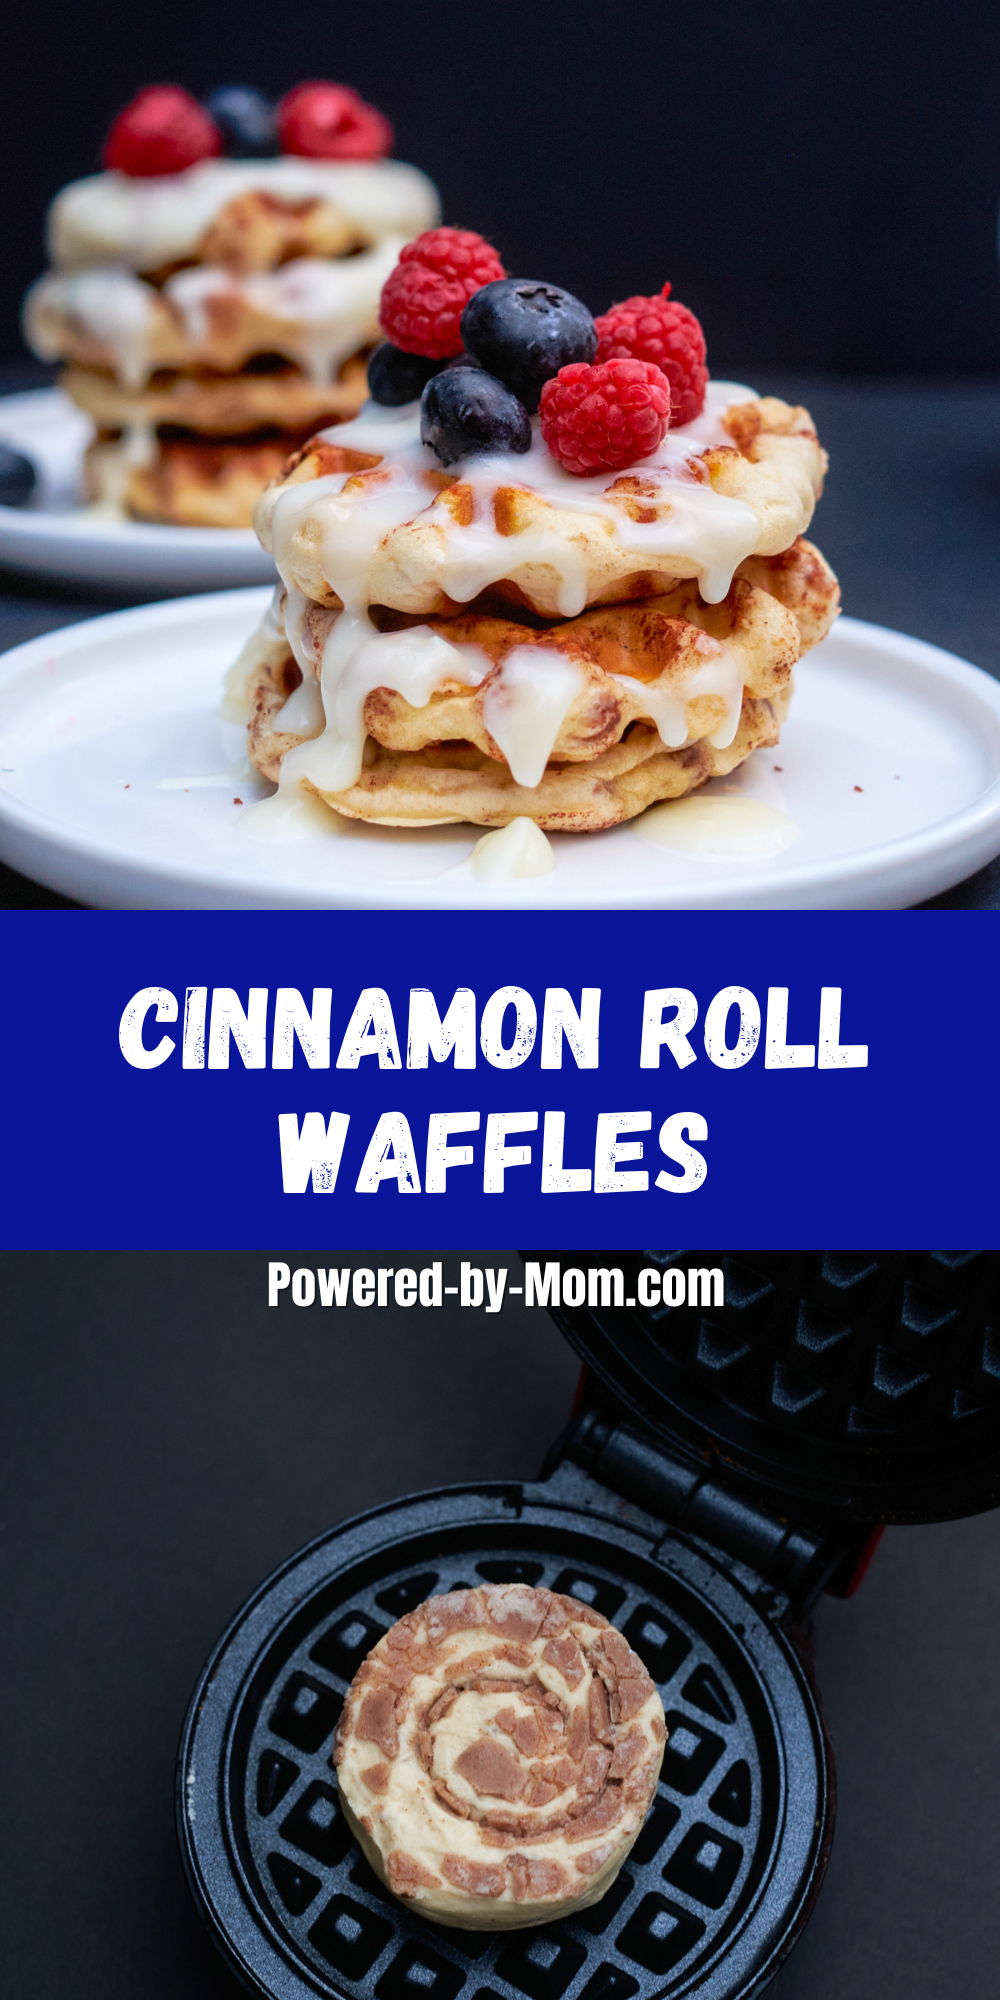 Cinnamon roll waffles topped with a decadent cream cheese icing. A delicious treat that is easy to make and ready in just a few minutes.